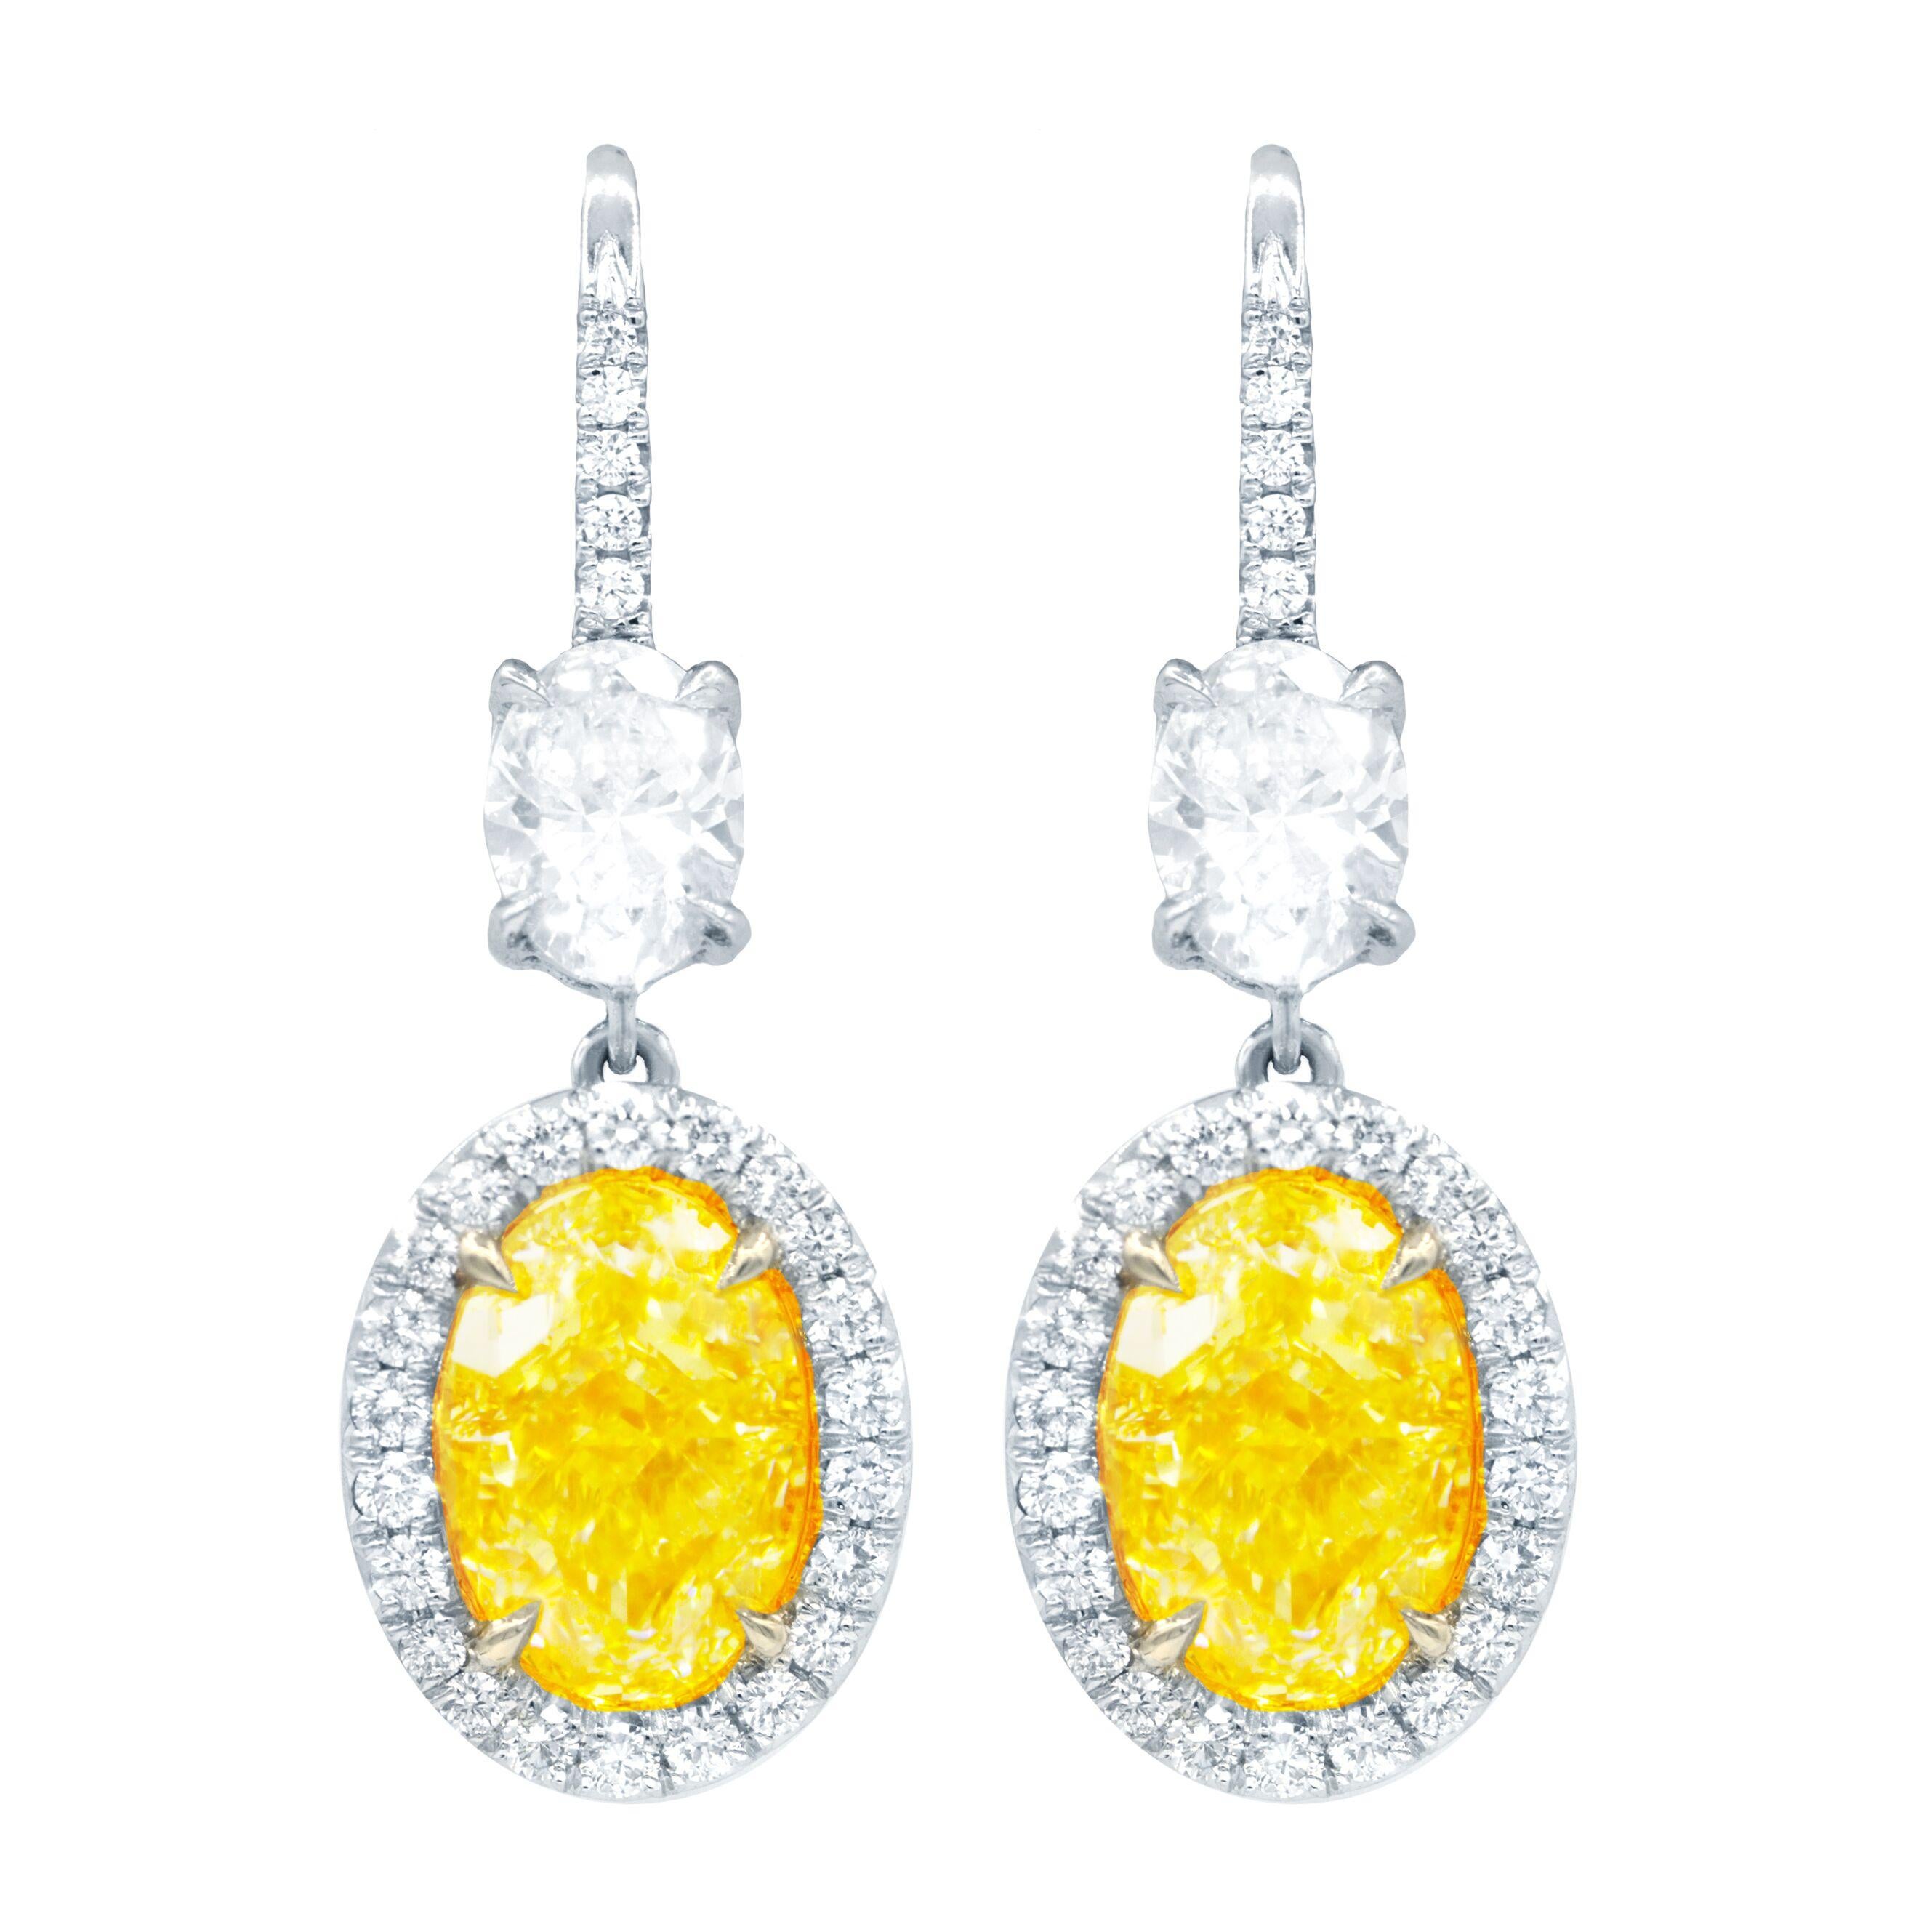 Oval Cut Diana M. GIA Certified 8 Carat Oval Shaped Yellow Diamond Earrings For Sale